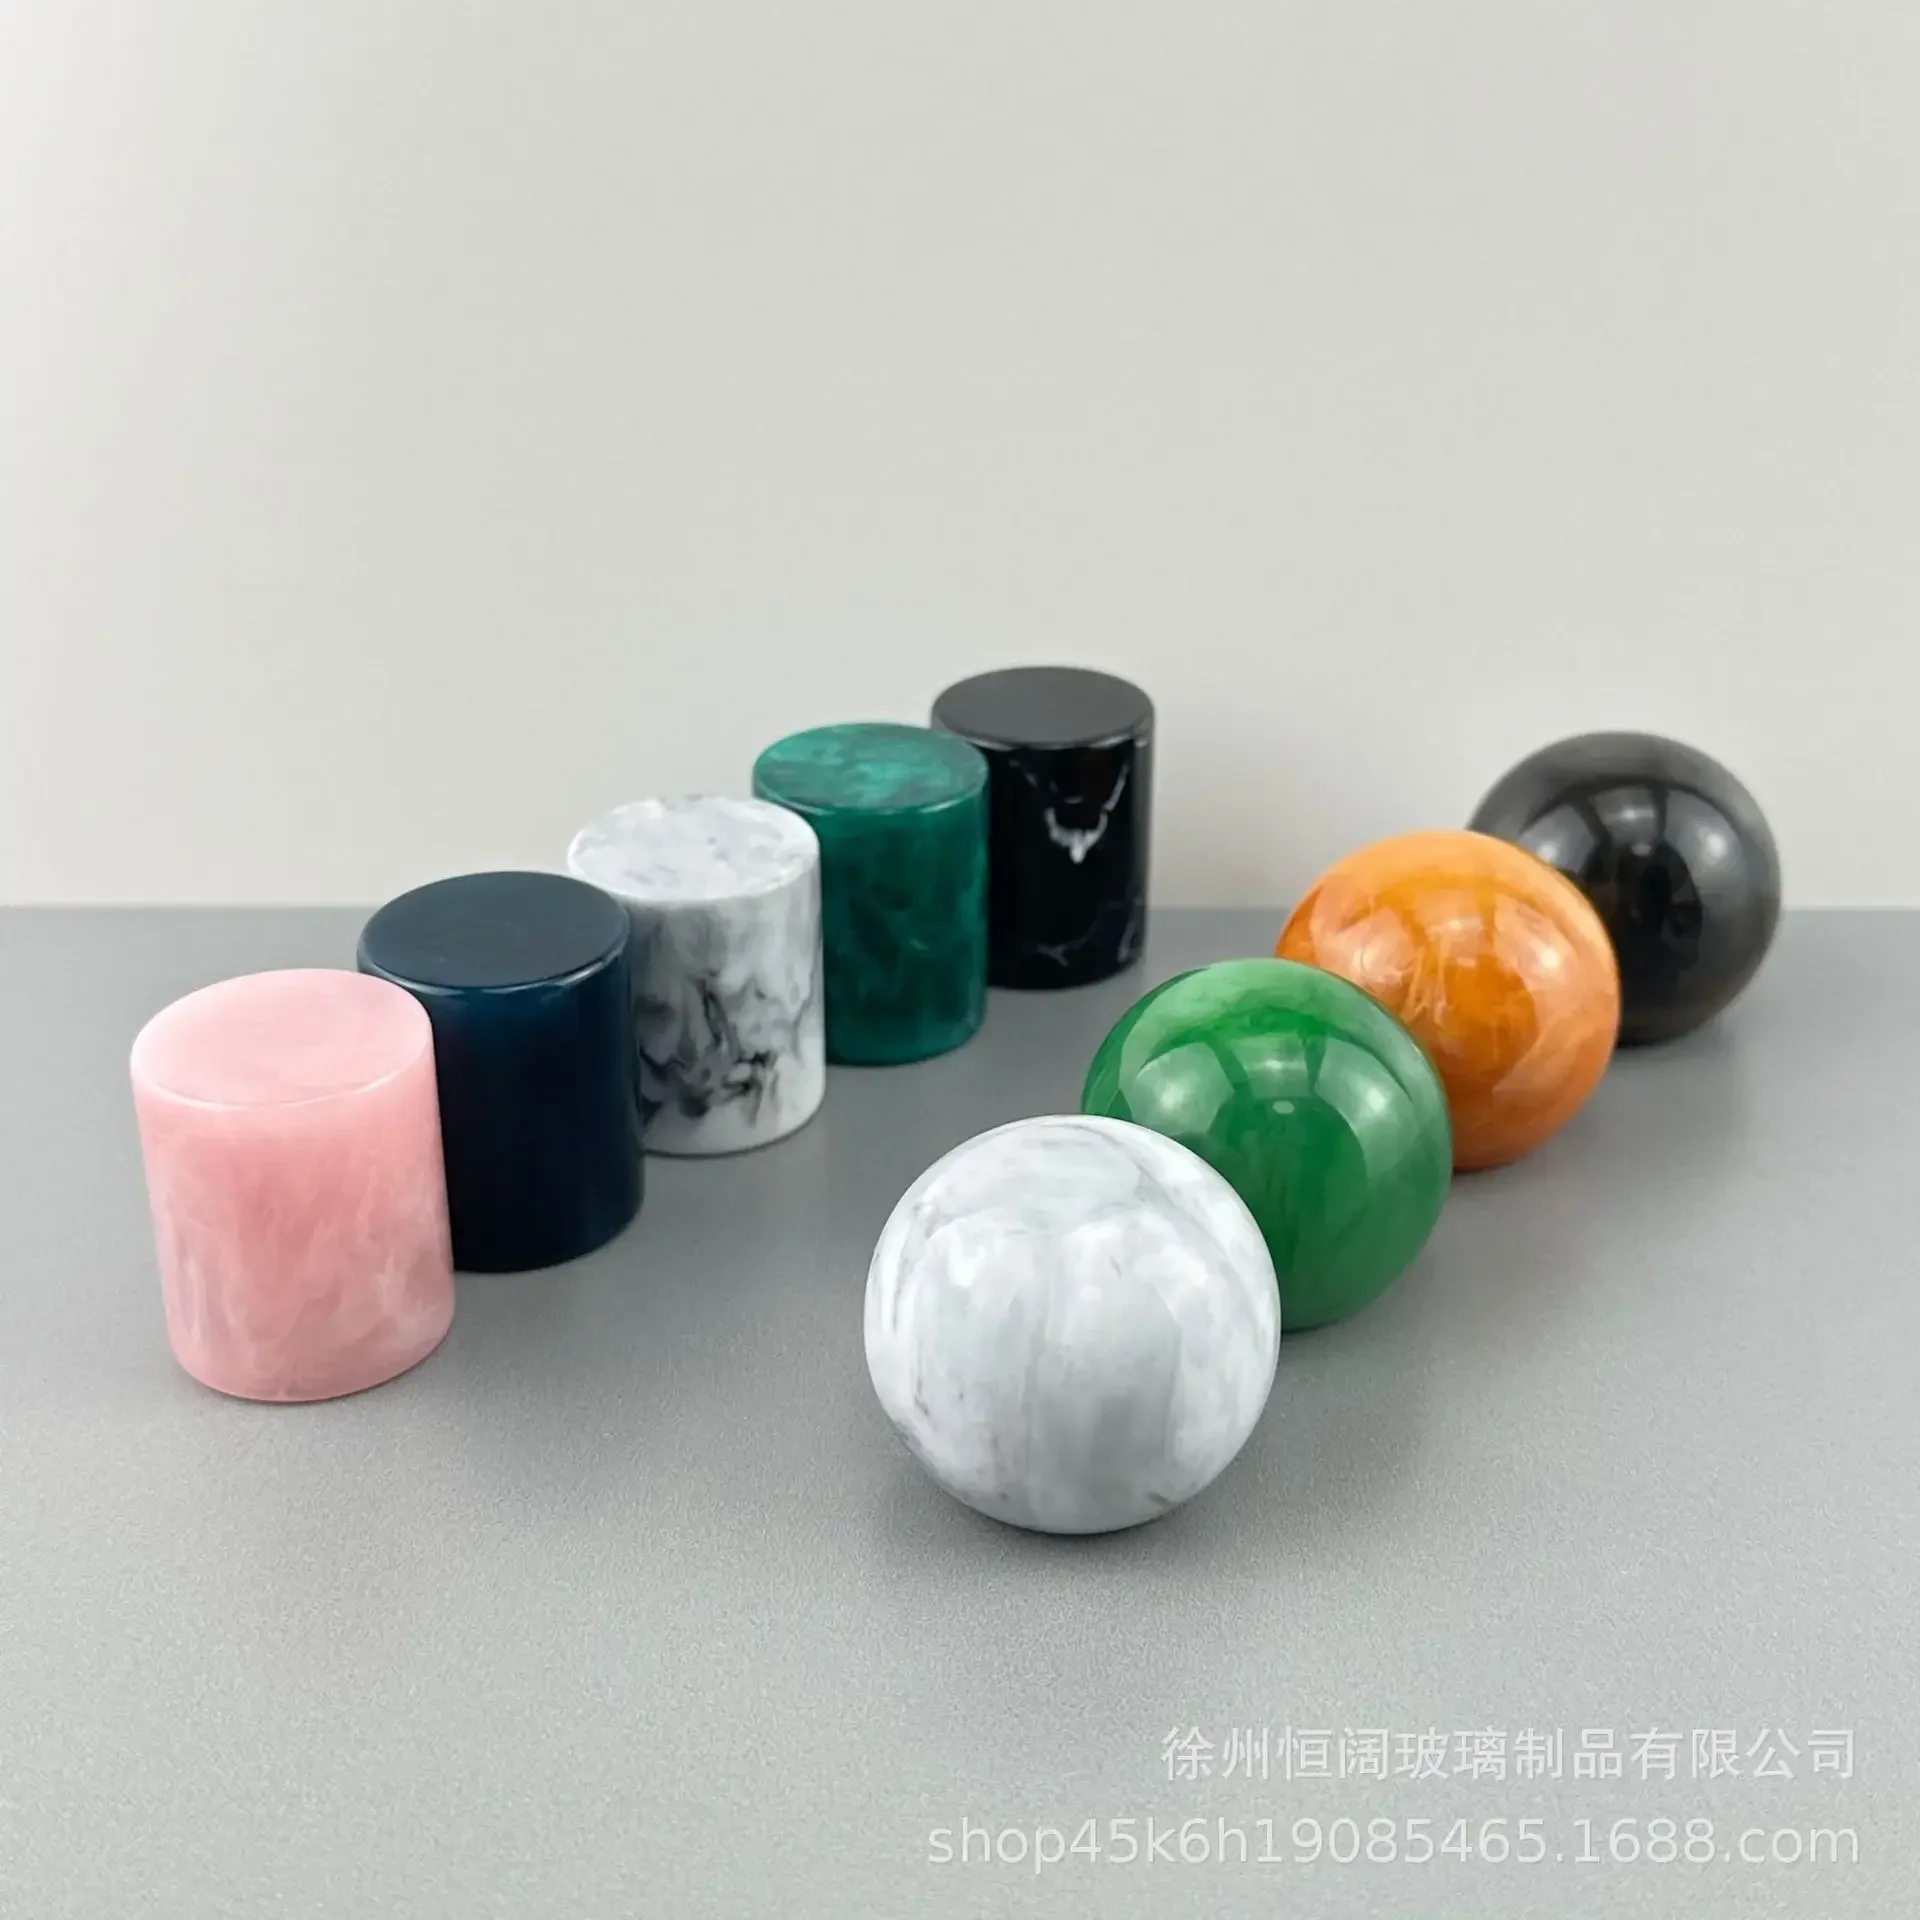 15mm Refillable Bottles Cap, Resin Cover and Spherical 15 Bayonet Cap,cylindrical color pattern plastic cover bottle accessories